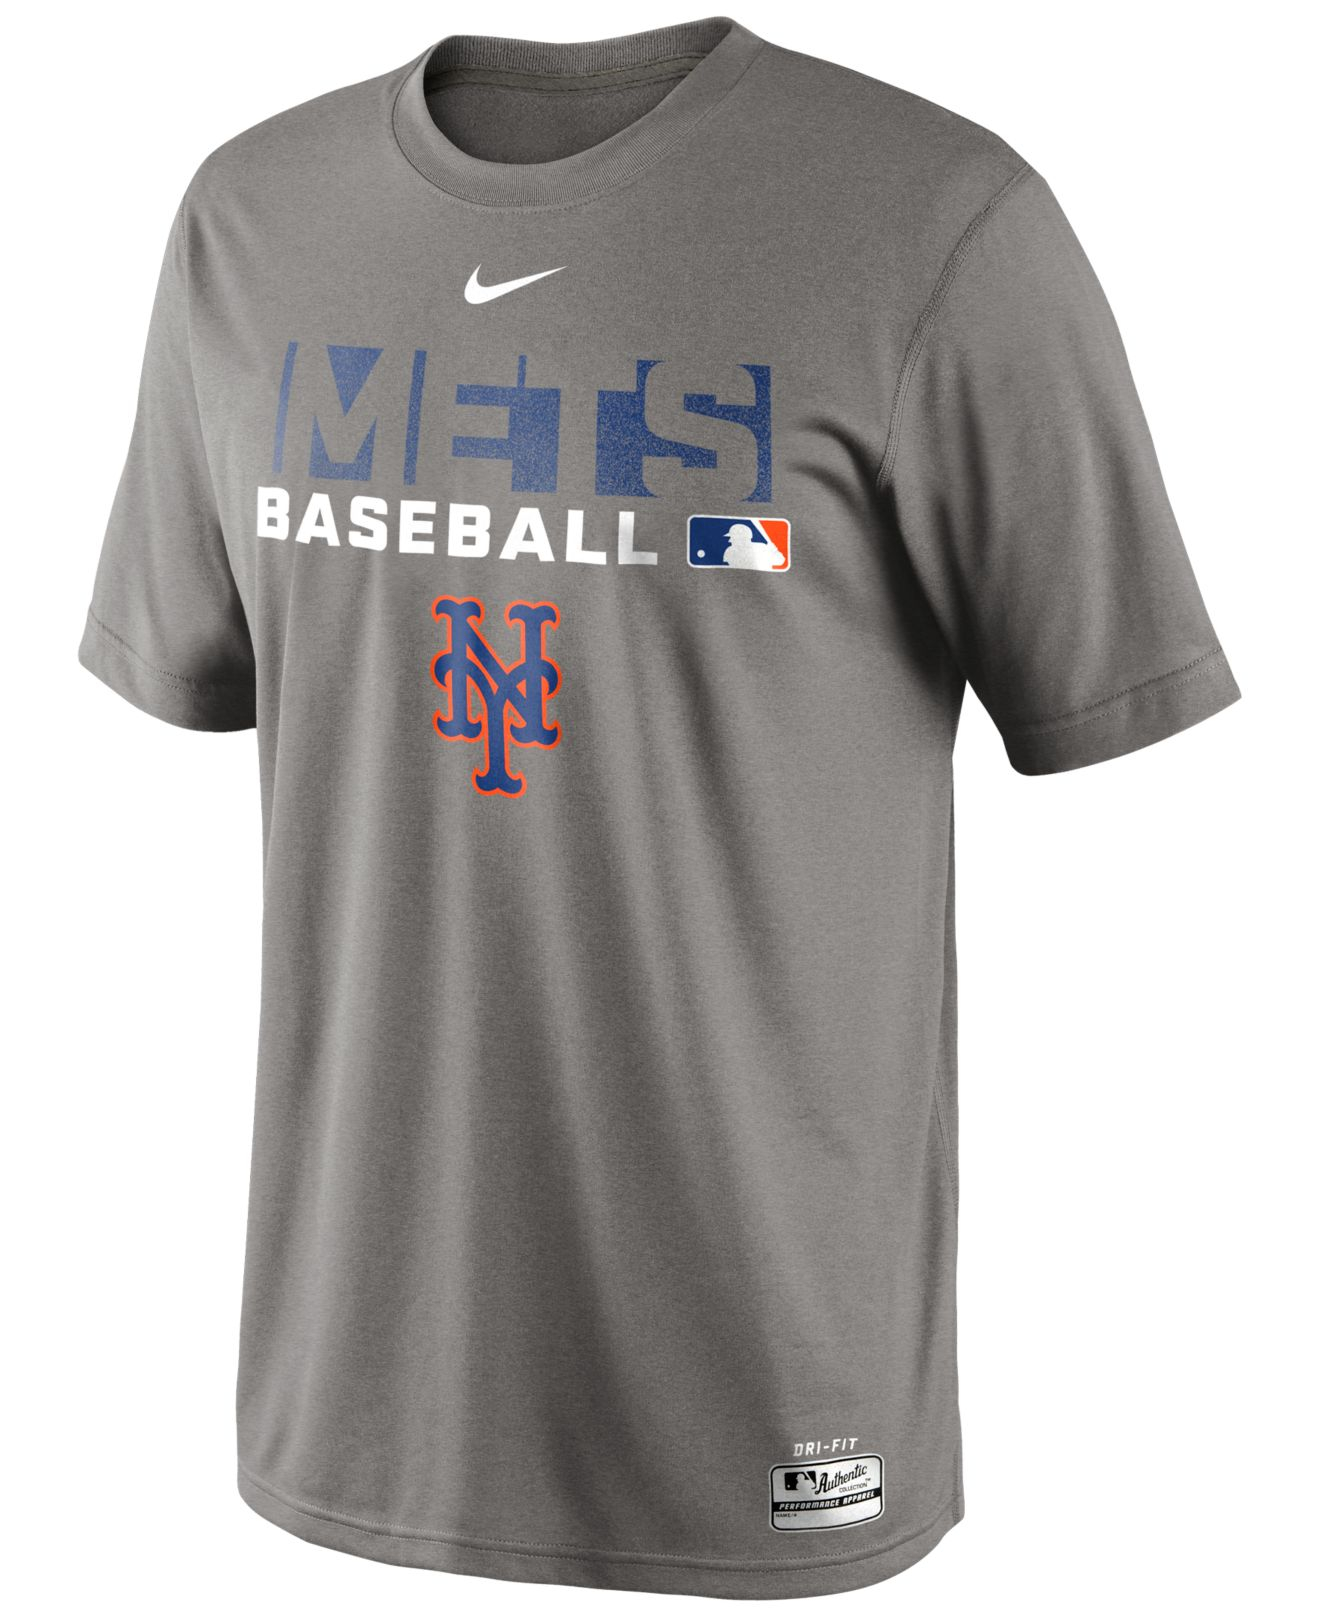 Lyst - Nike Men's New York Mets Authentic Collection Dri-fit Legend ...